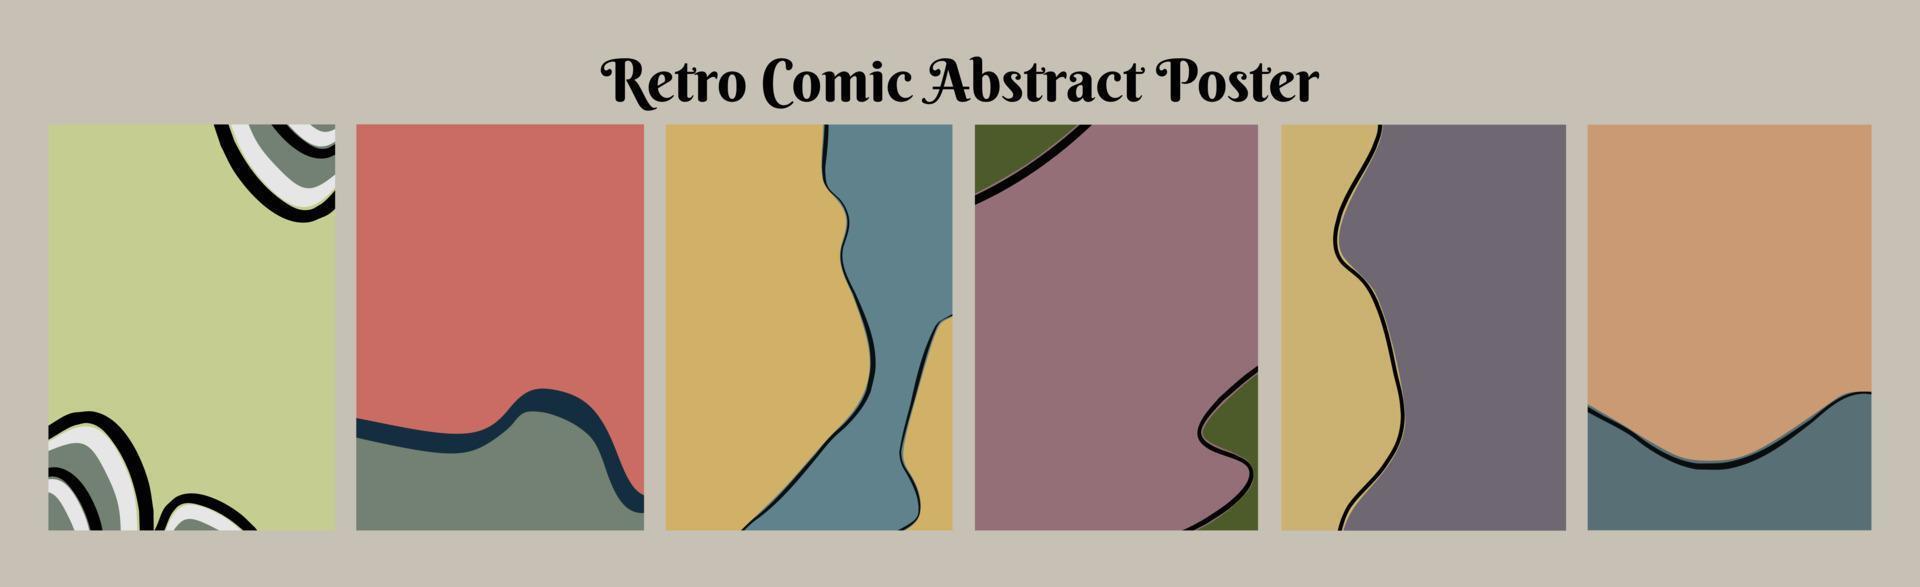 Retro Vintage Comic Abstract Poster Classic Pop Art Background. vector